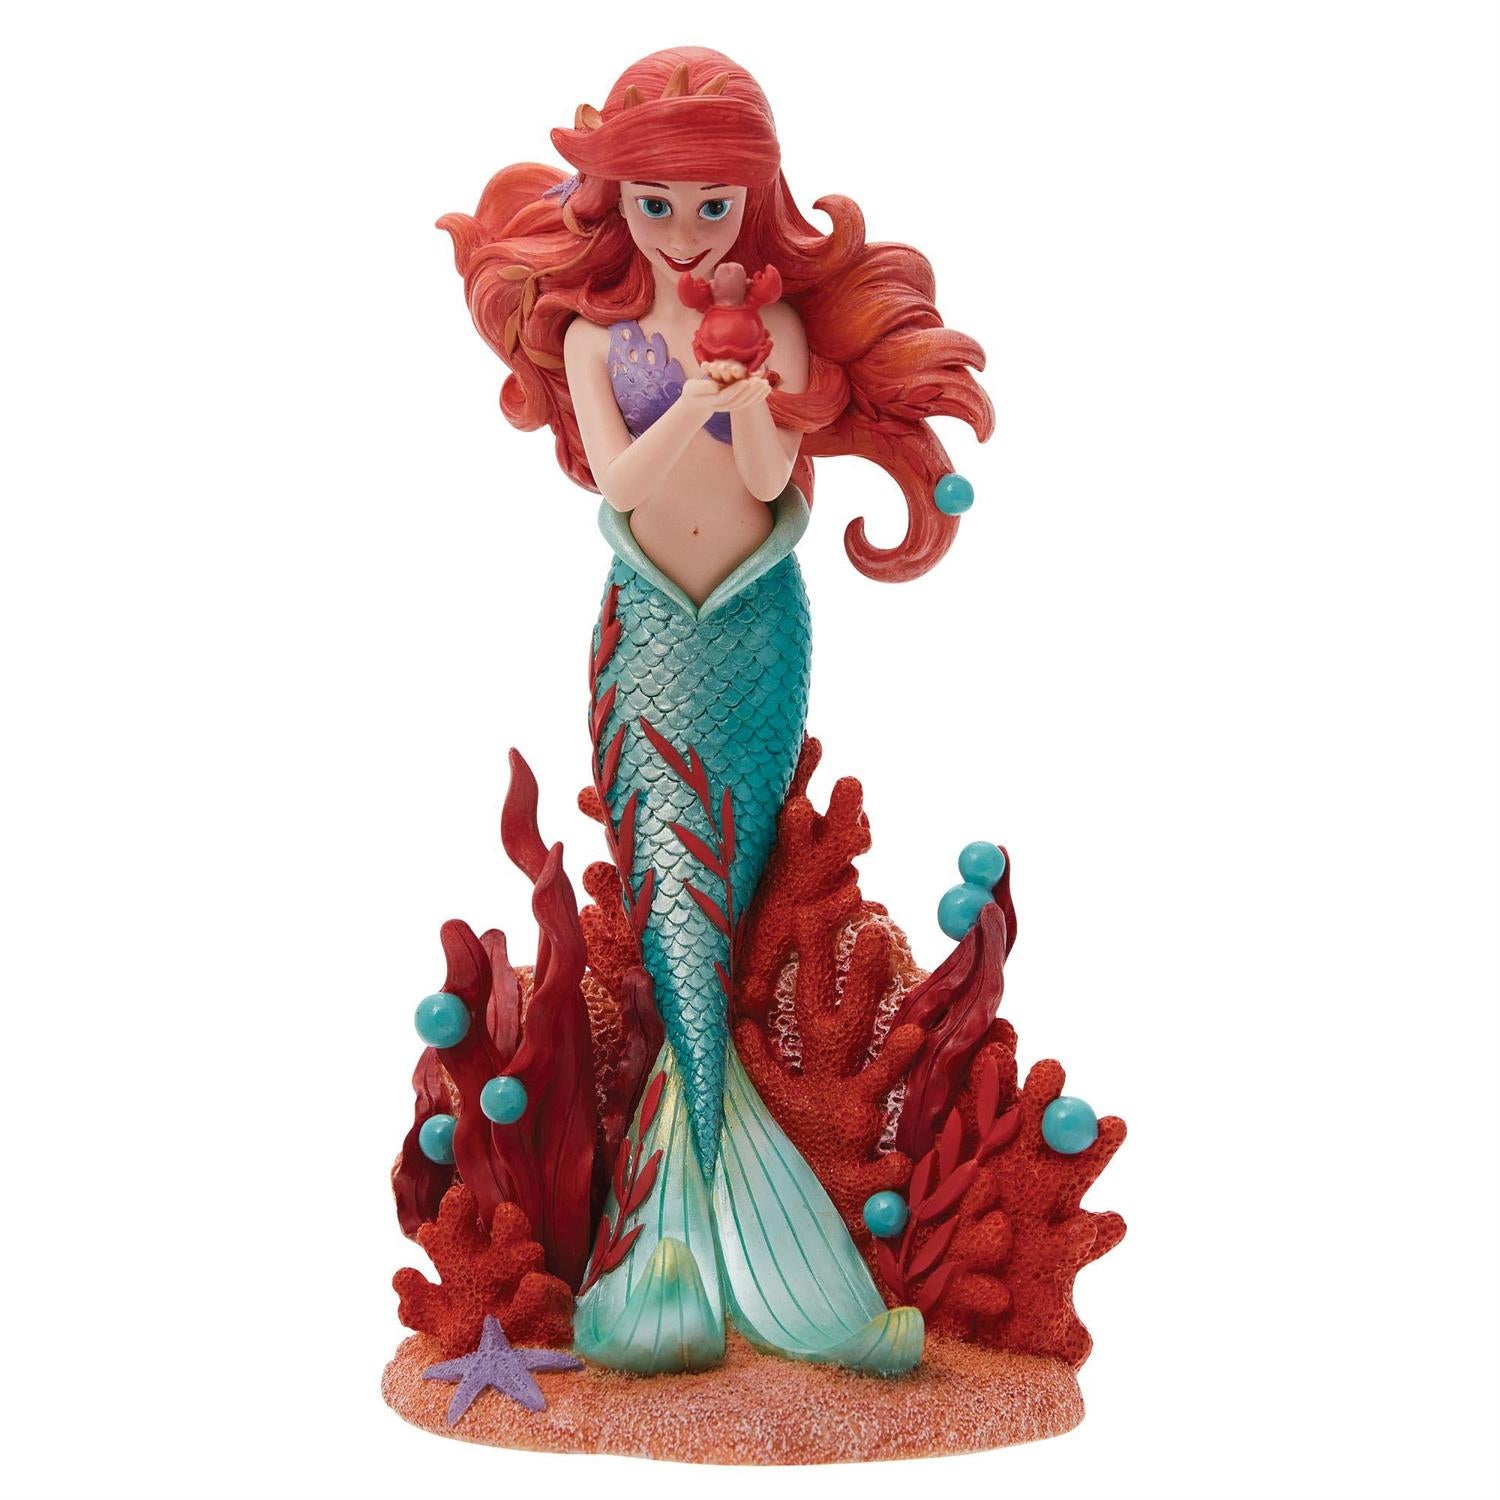 Ariel holds a small Sabastian in her delicate hands.